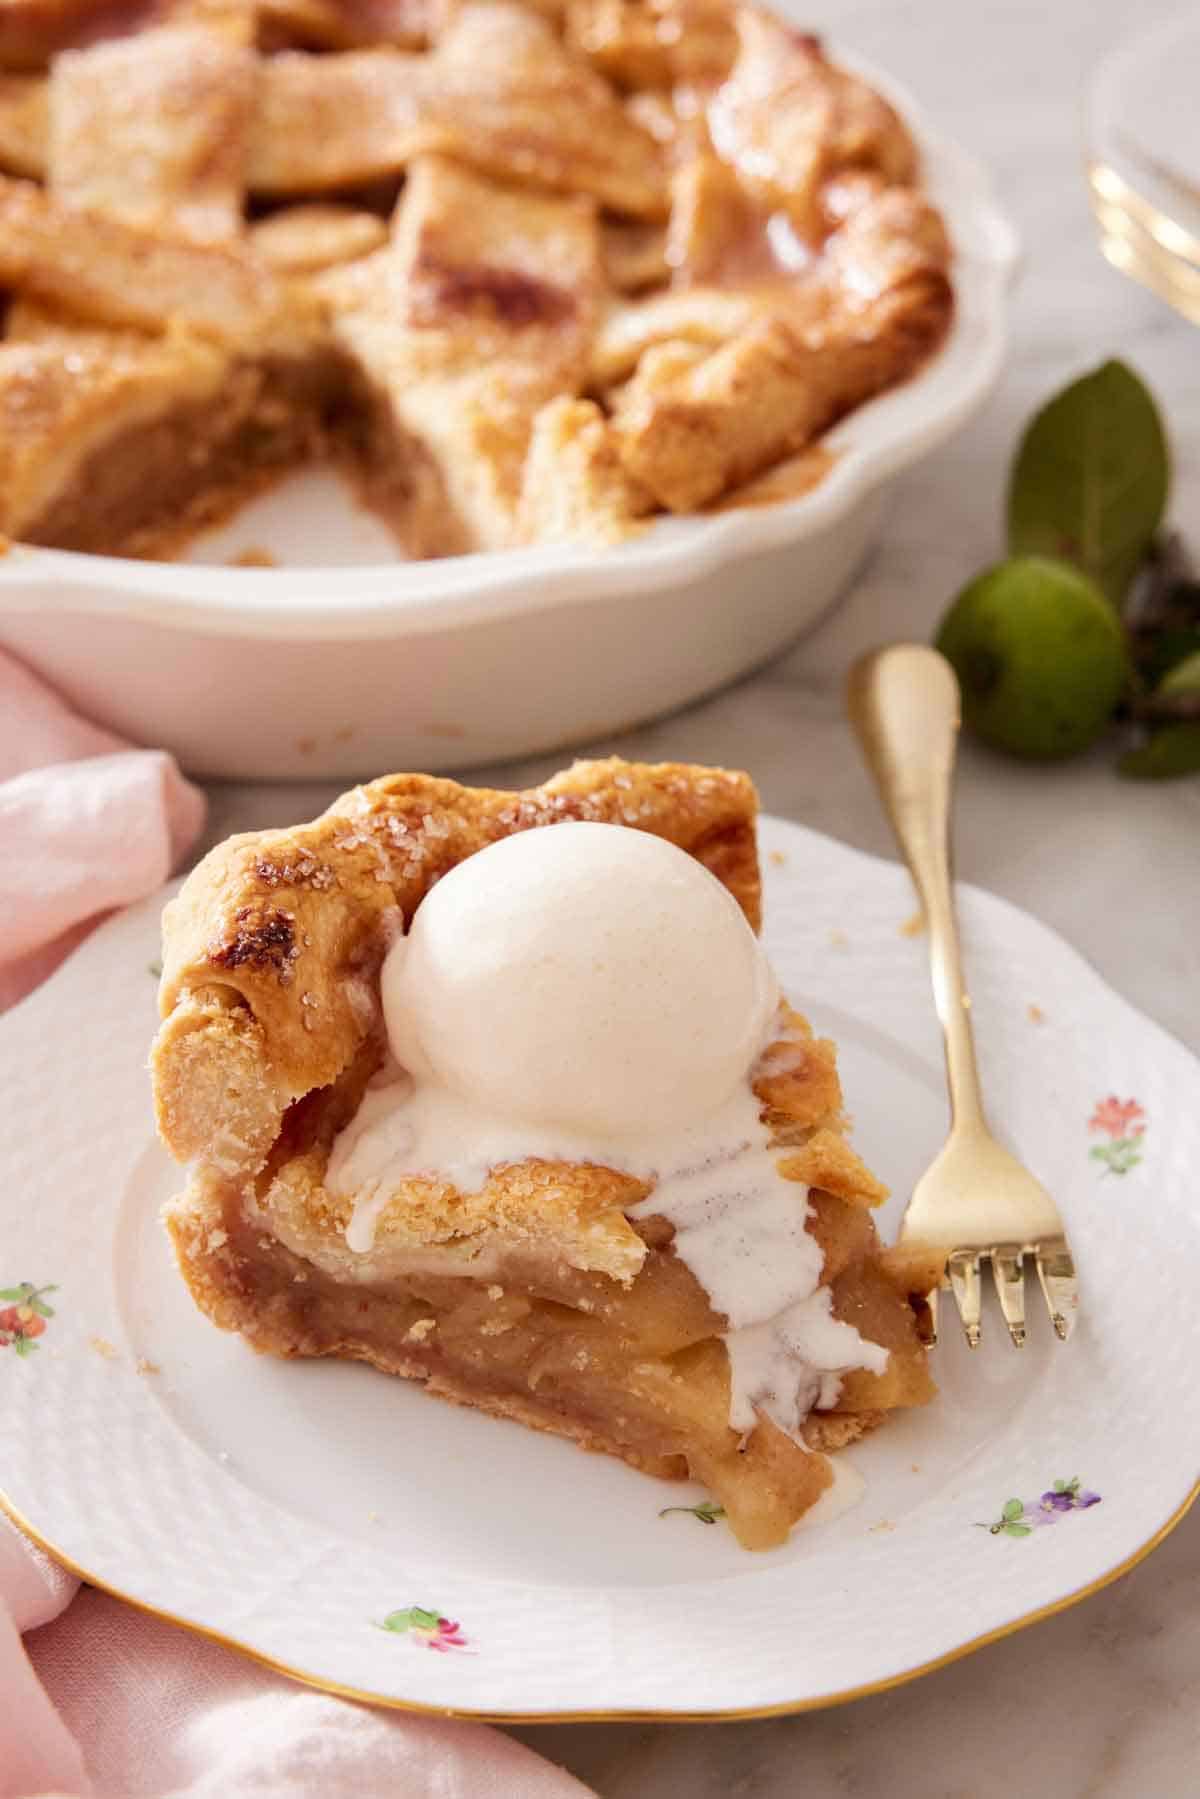 A plate with a slice of apple pie with a scoop of melting vanilla ice cream on top. A fork beside the slice and the rest of the pie in the background.